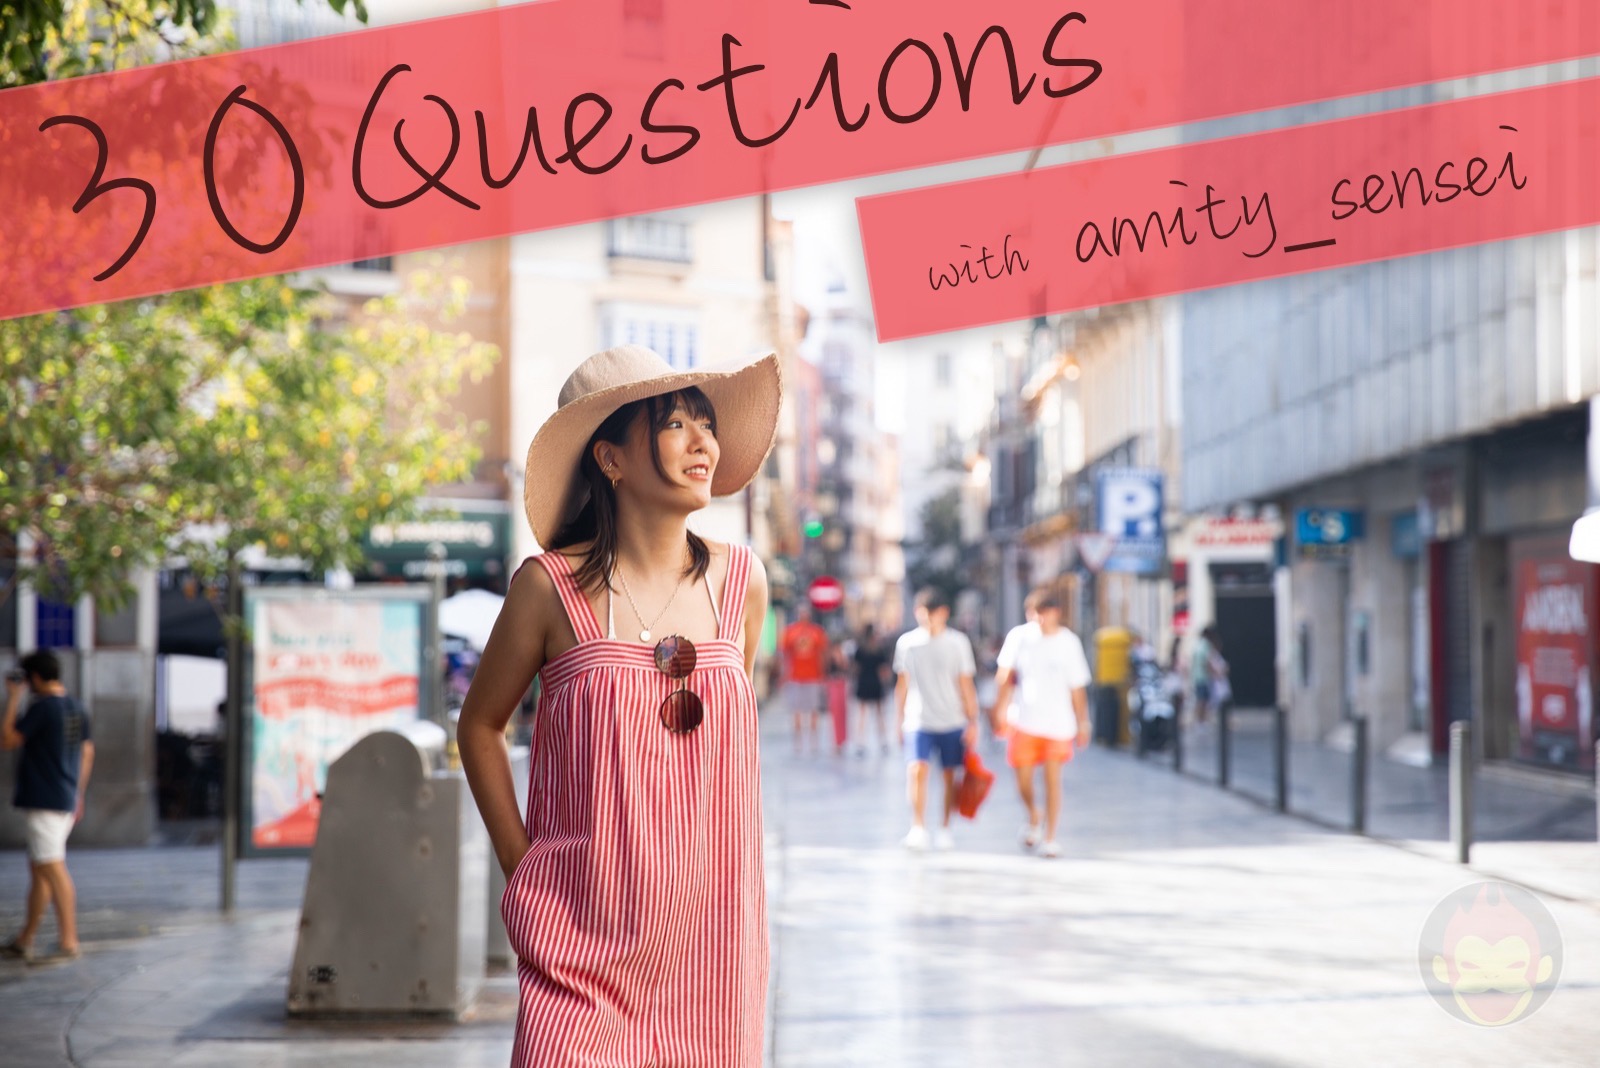 30 questions with amity sensei